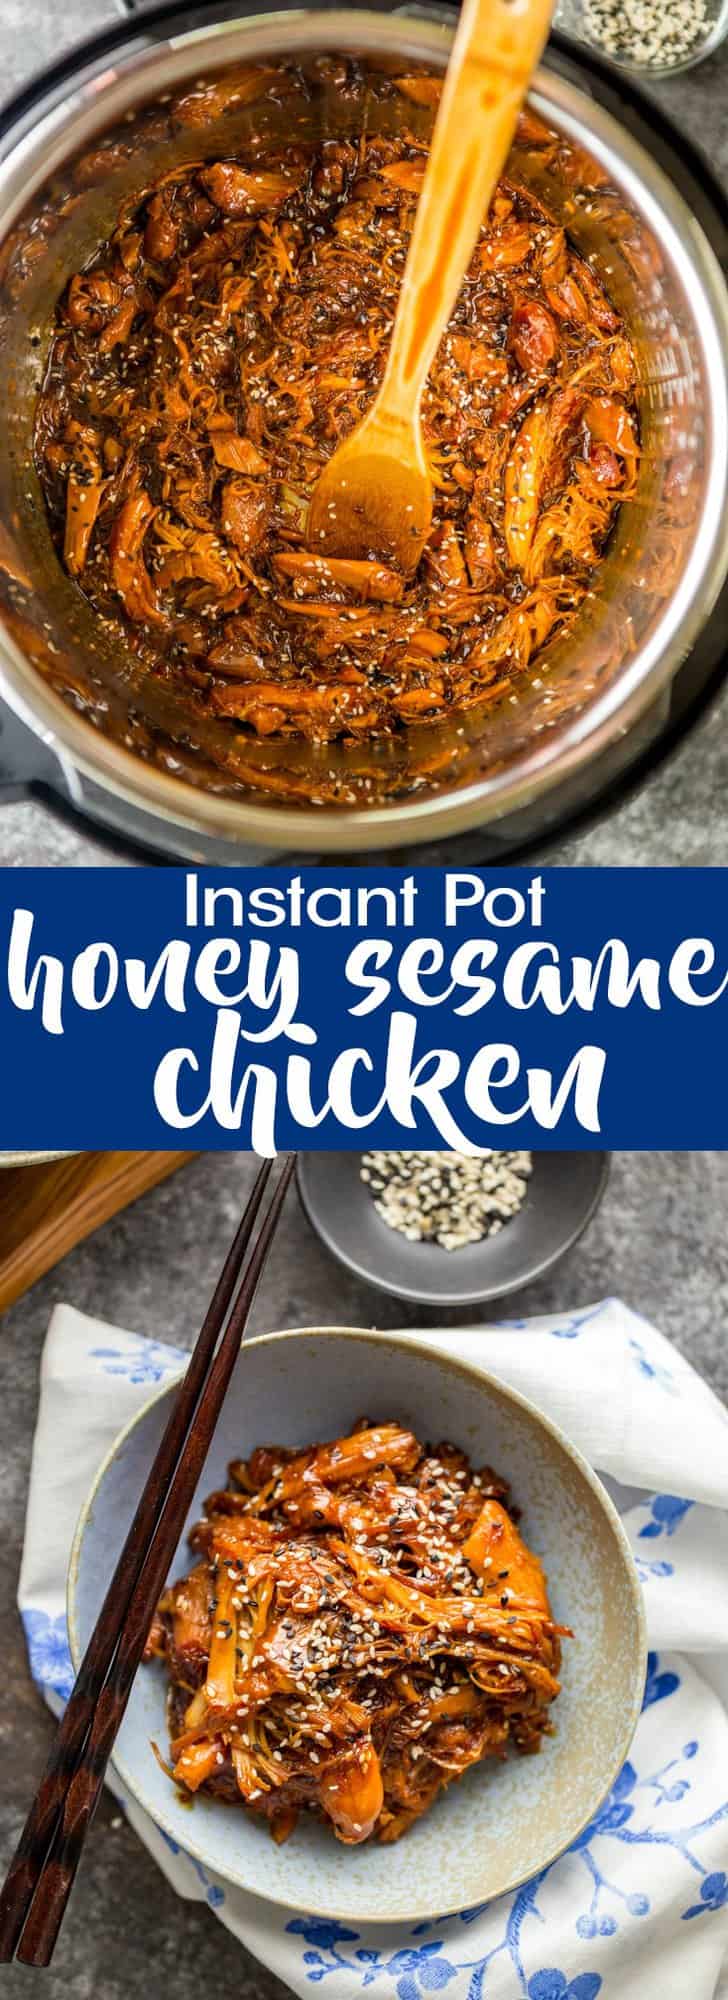 This Instant Pot Honey Sesame Chicken is so fast and easy! This sweet and savory Honey Sesame Chicken is a snap to make in your electric pressure cooker! |Instant Pot Recipe | Instant Pot Chicken Recipe | Electric Pressure Cooker Chicken recipe | Instant Pot Dinner Recipe | Pressure Cooker Chicken recipe